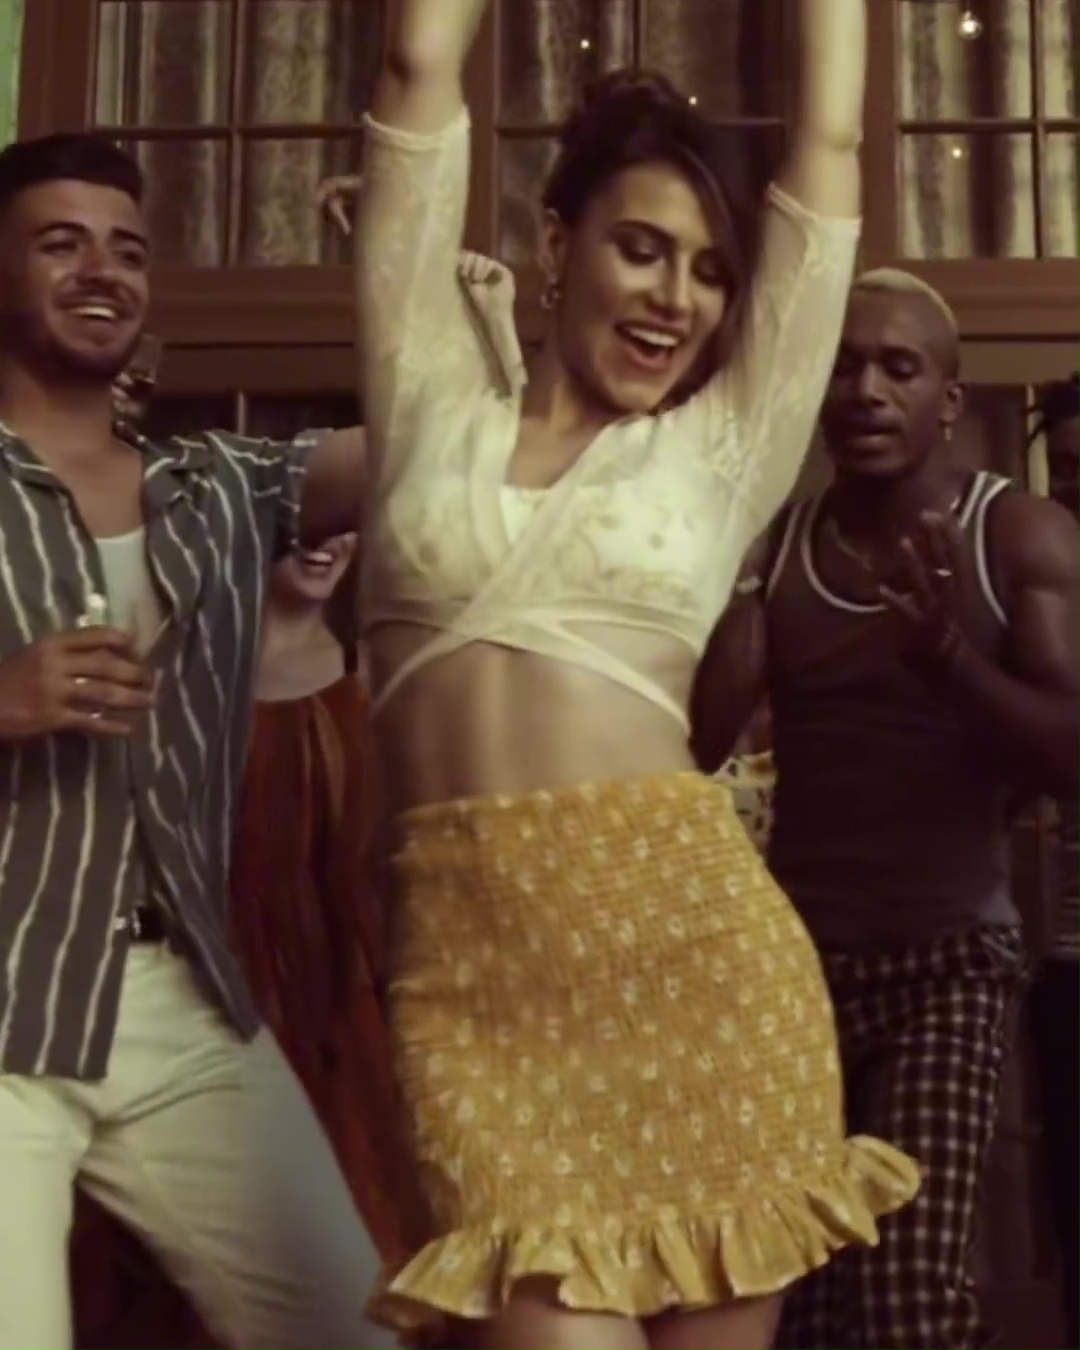 Barbara starred in the music video for song Punta Cana